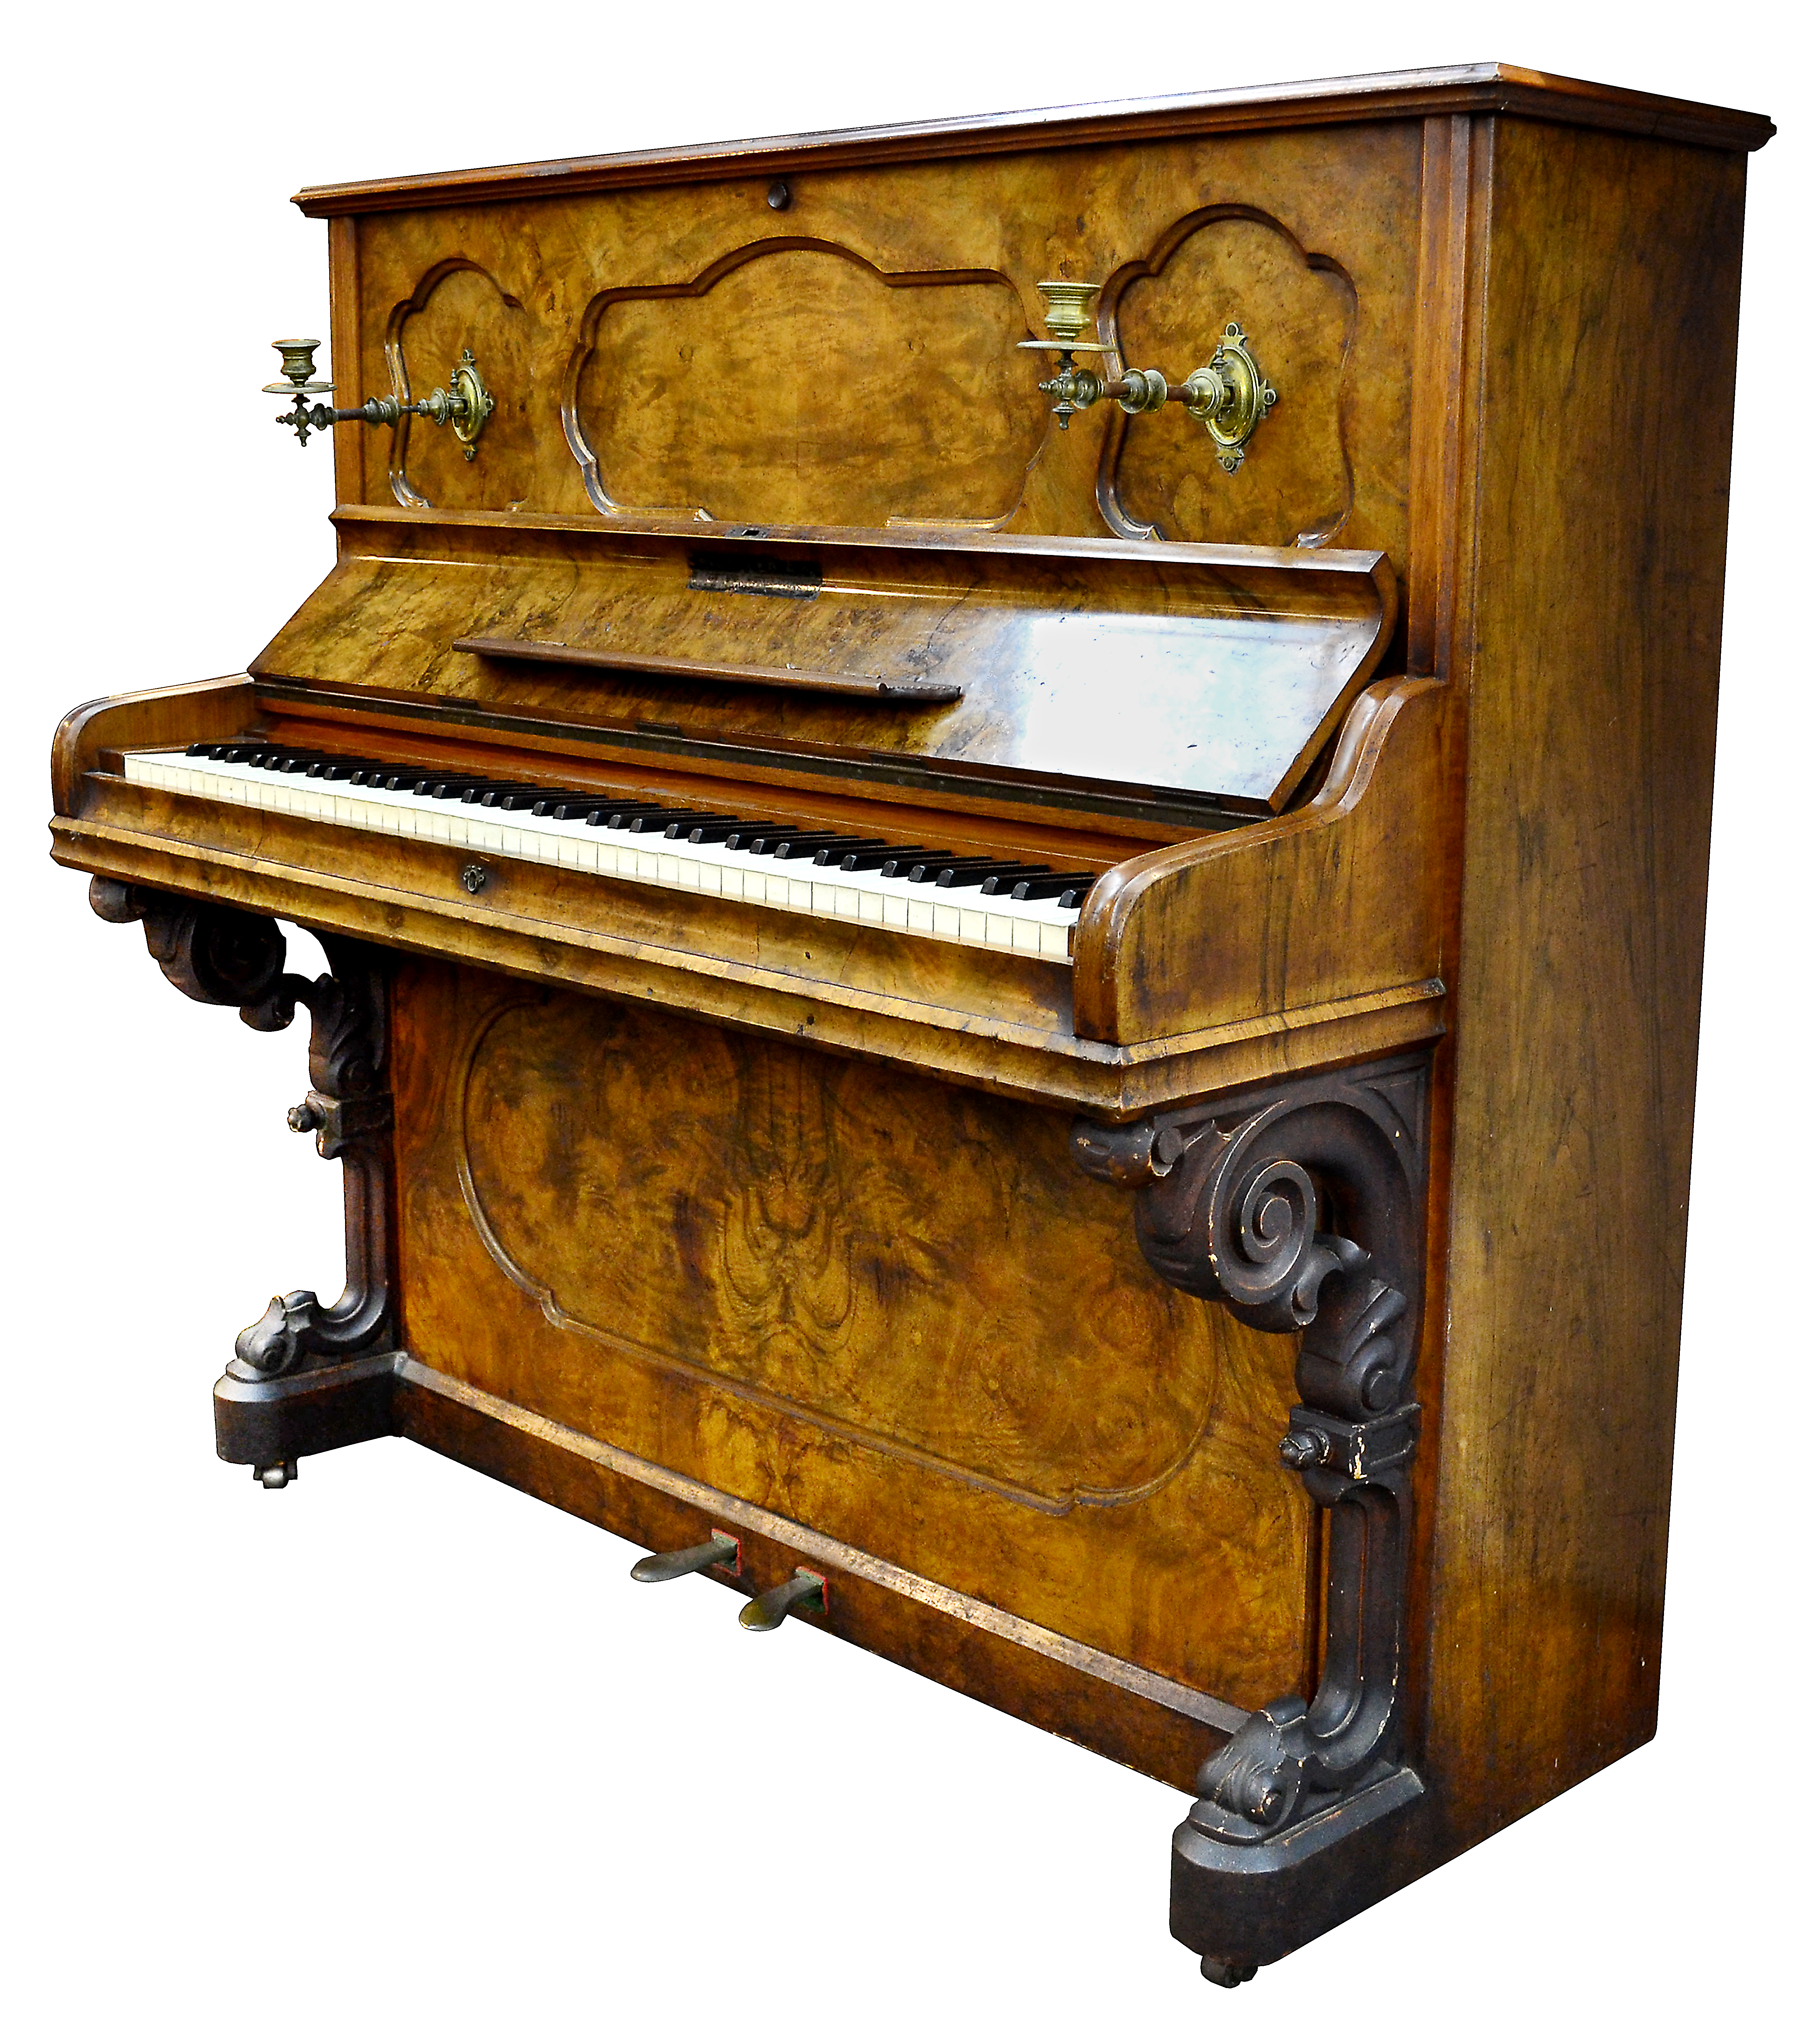 Upright wood paneled piano, cover opened to reveal row of white and black keys. Above the keys are two brass candle holders. 